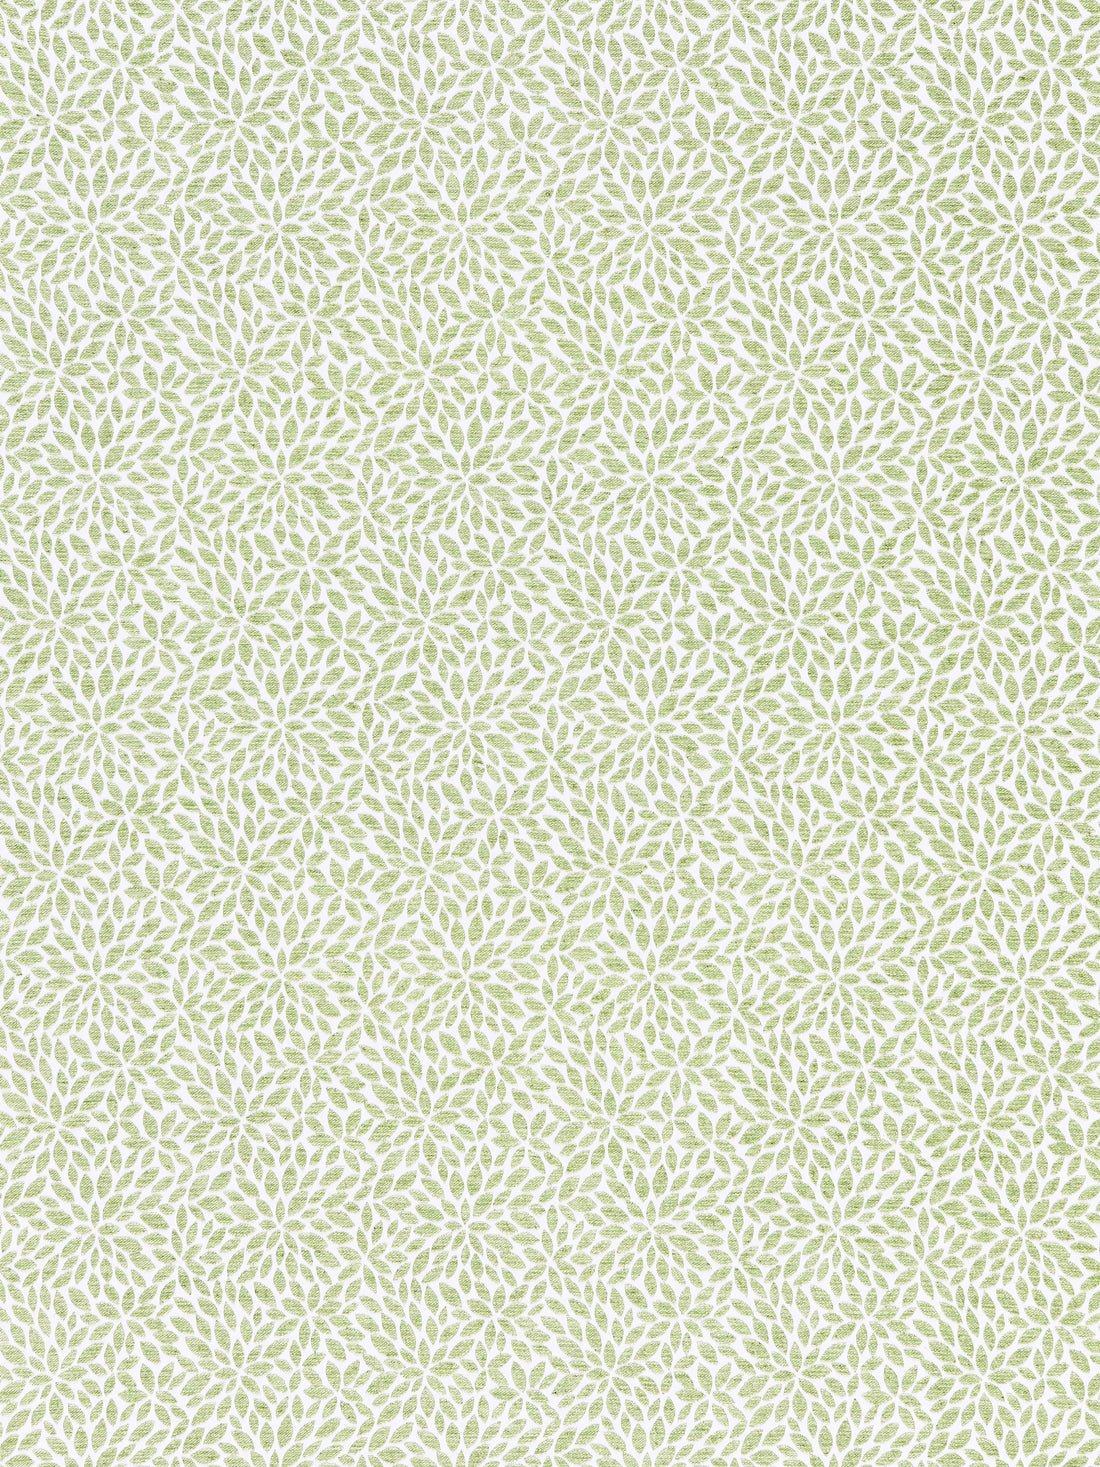 Risa Weave fabric in fern color - pattern number SC 000227239 - by Scalamandre in the Scalamandre Fabrics Book 1 collection